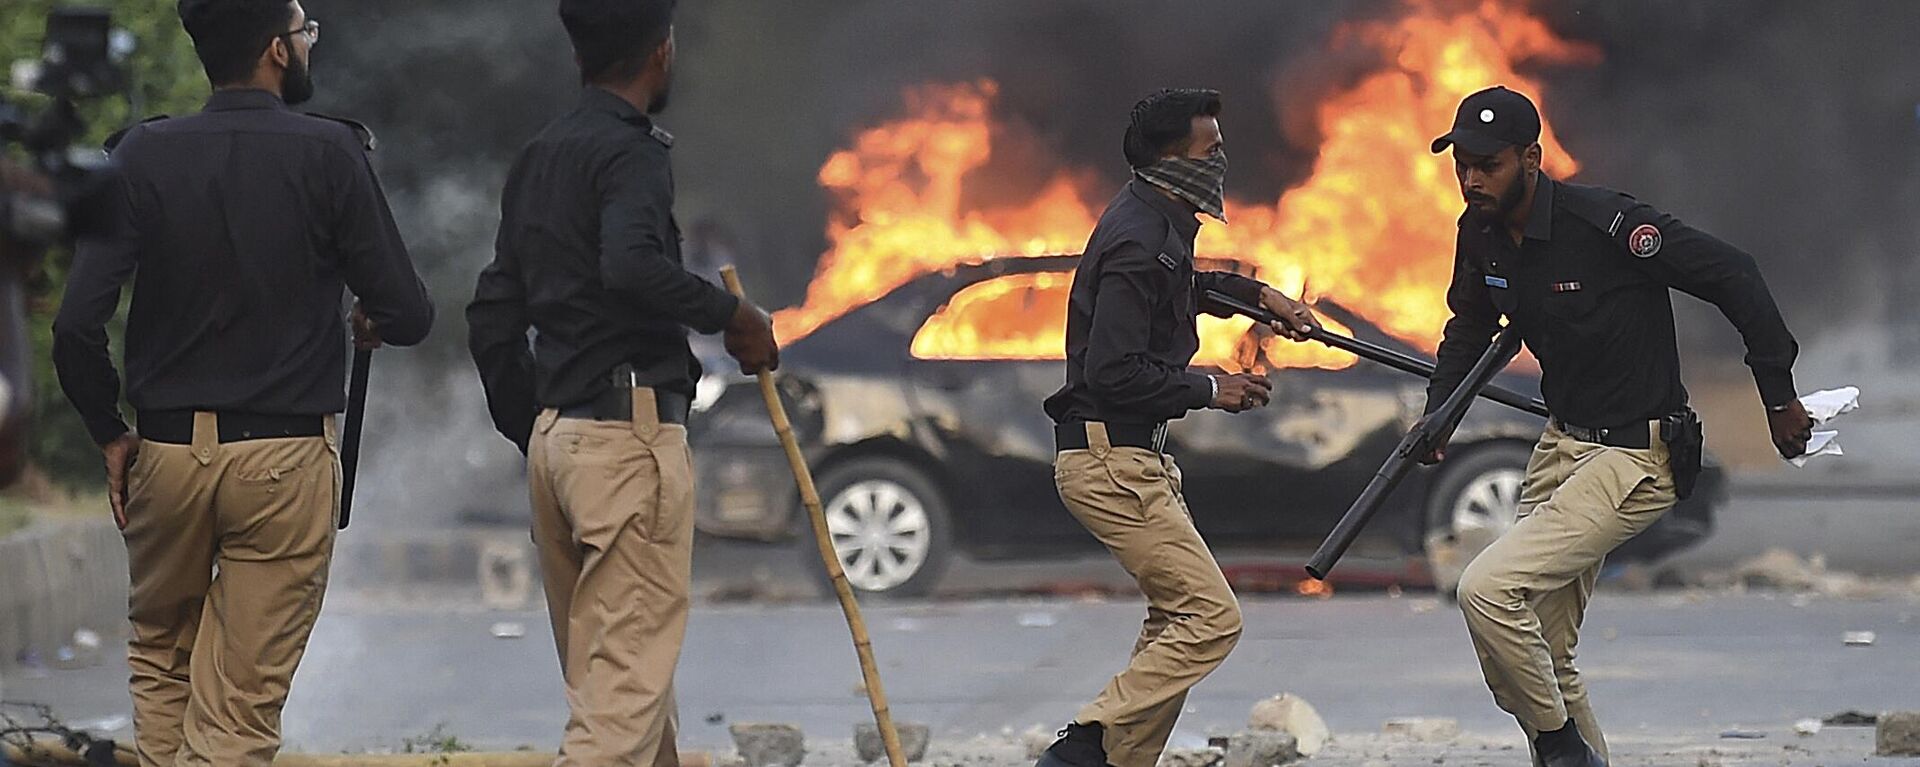 Policemen retreat after firing teargas shells towards Pakistan Tehreek-e-Insaf (PTI) party activists and supporters of former Pakistan's Prime Minister Imran Khan near a burning car during a protest against the arrest of their leader in Karachi on May 9, 2023 - Sputnik International, 1920, 10.05.2023